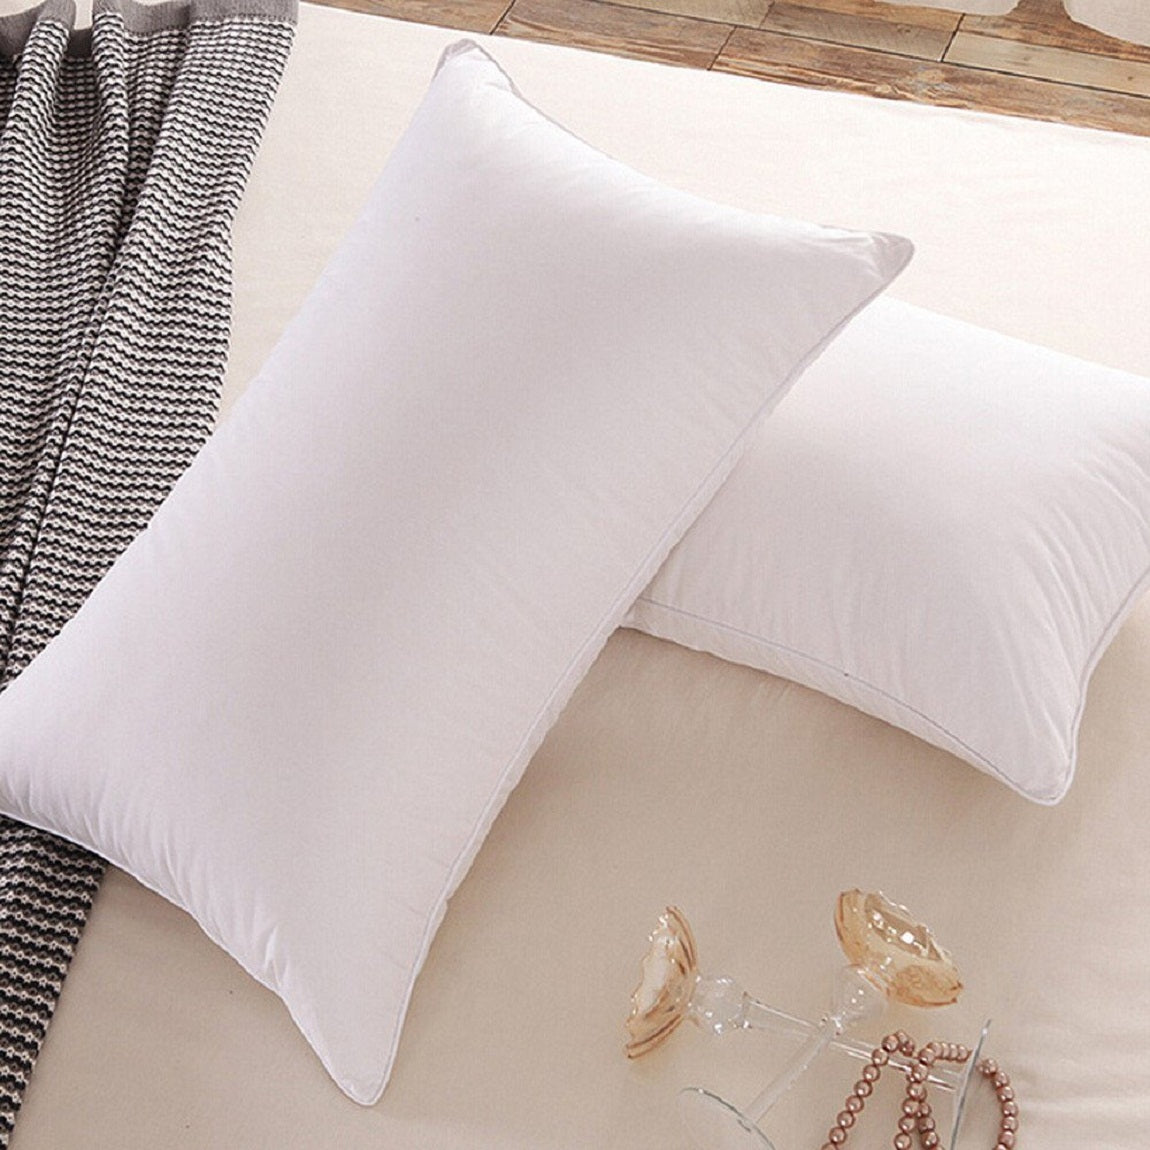 JDX White Pillows for Sleeping Pack with Luxury Hotel Quality, Super –  JDX STORE